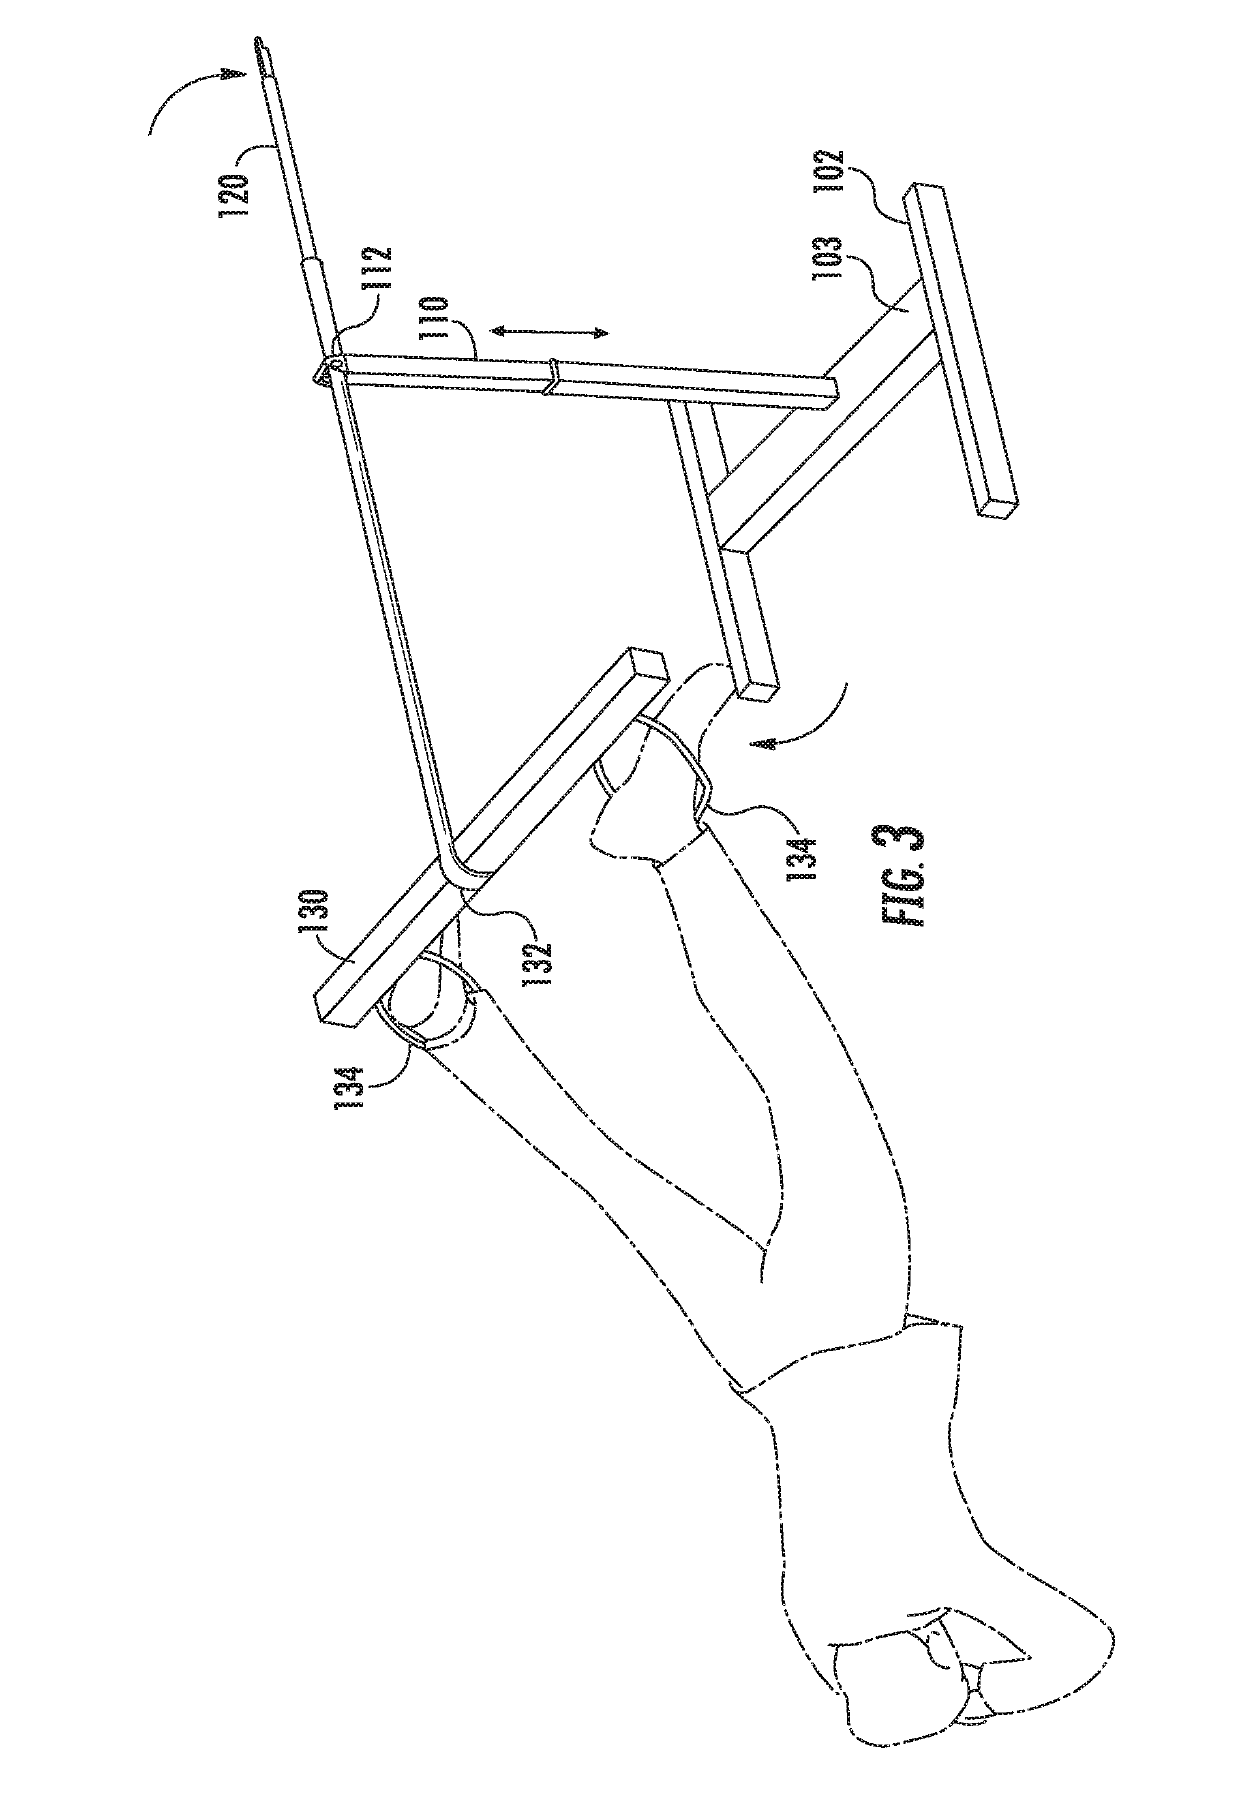 Stretching device to restore and protect against the negative effects of prolonged sitting